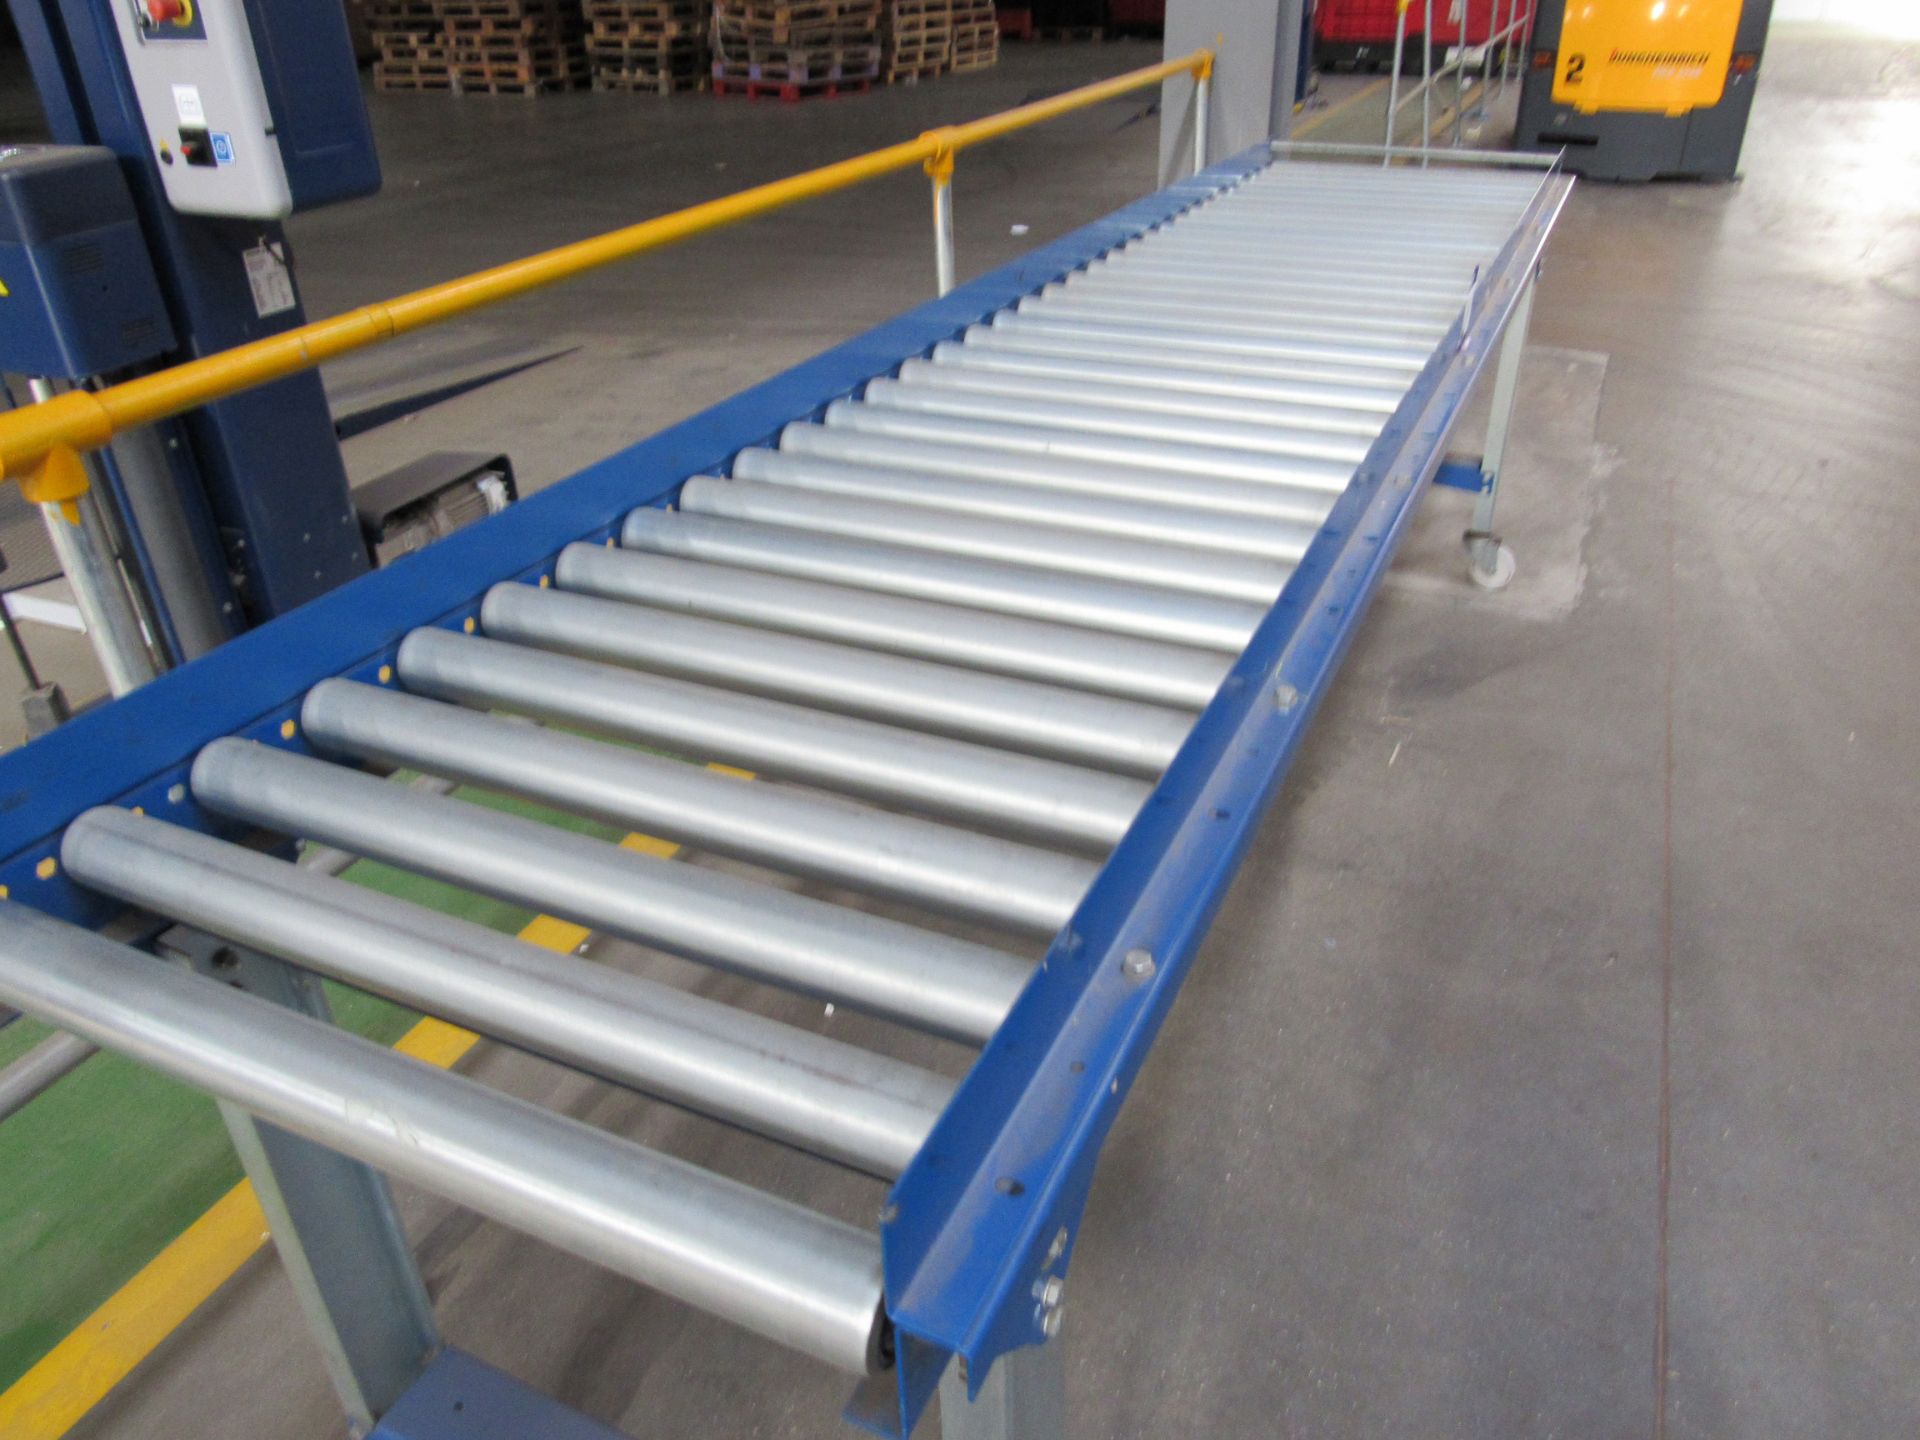 Mobile Roller Conveyor 2.5m x 0.5m, Approx. - Image 3 of 3